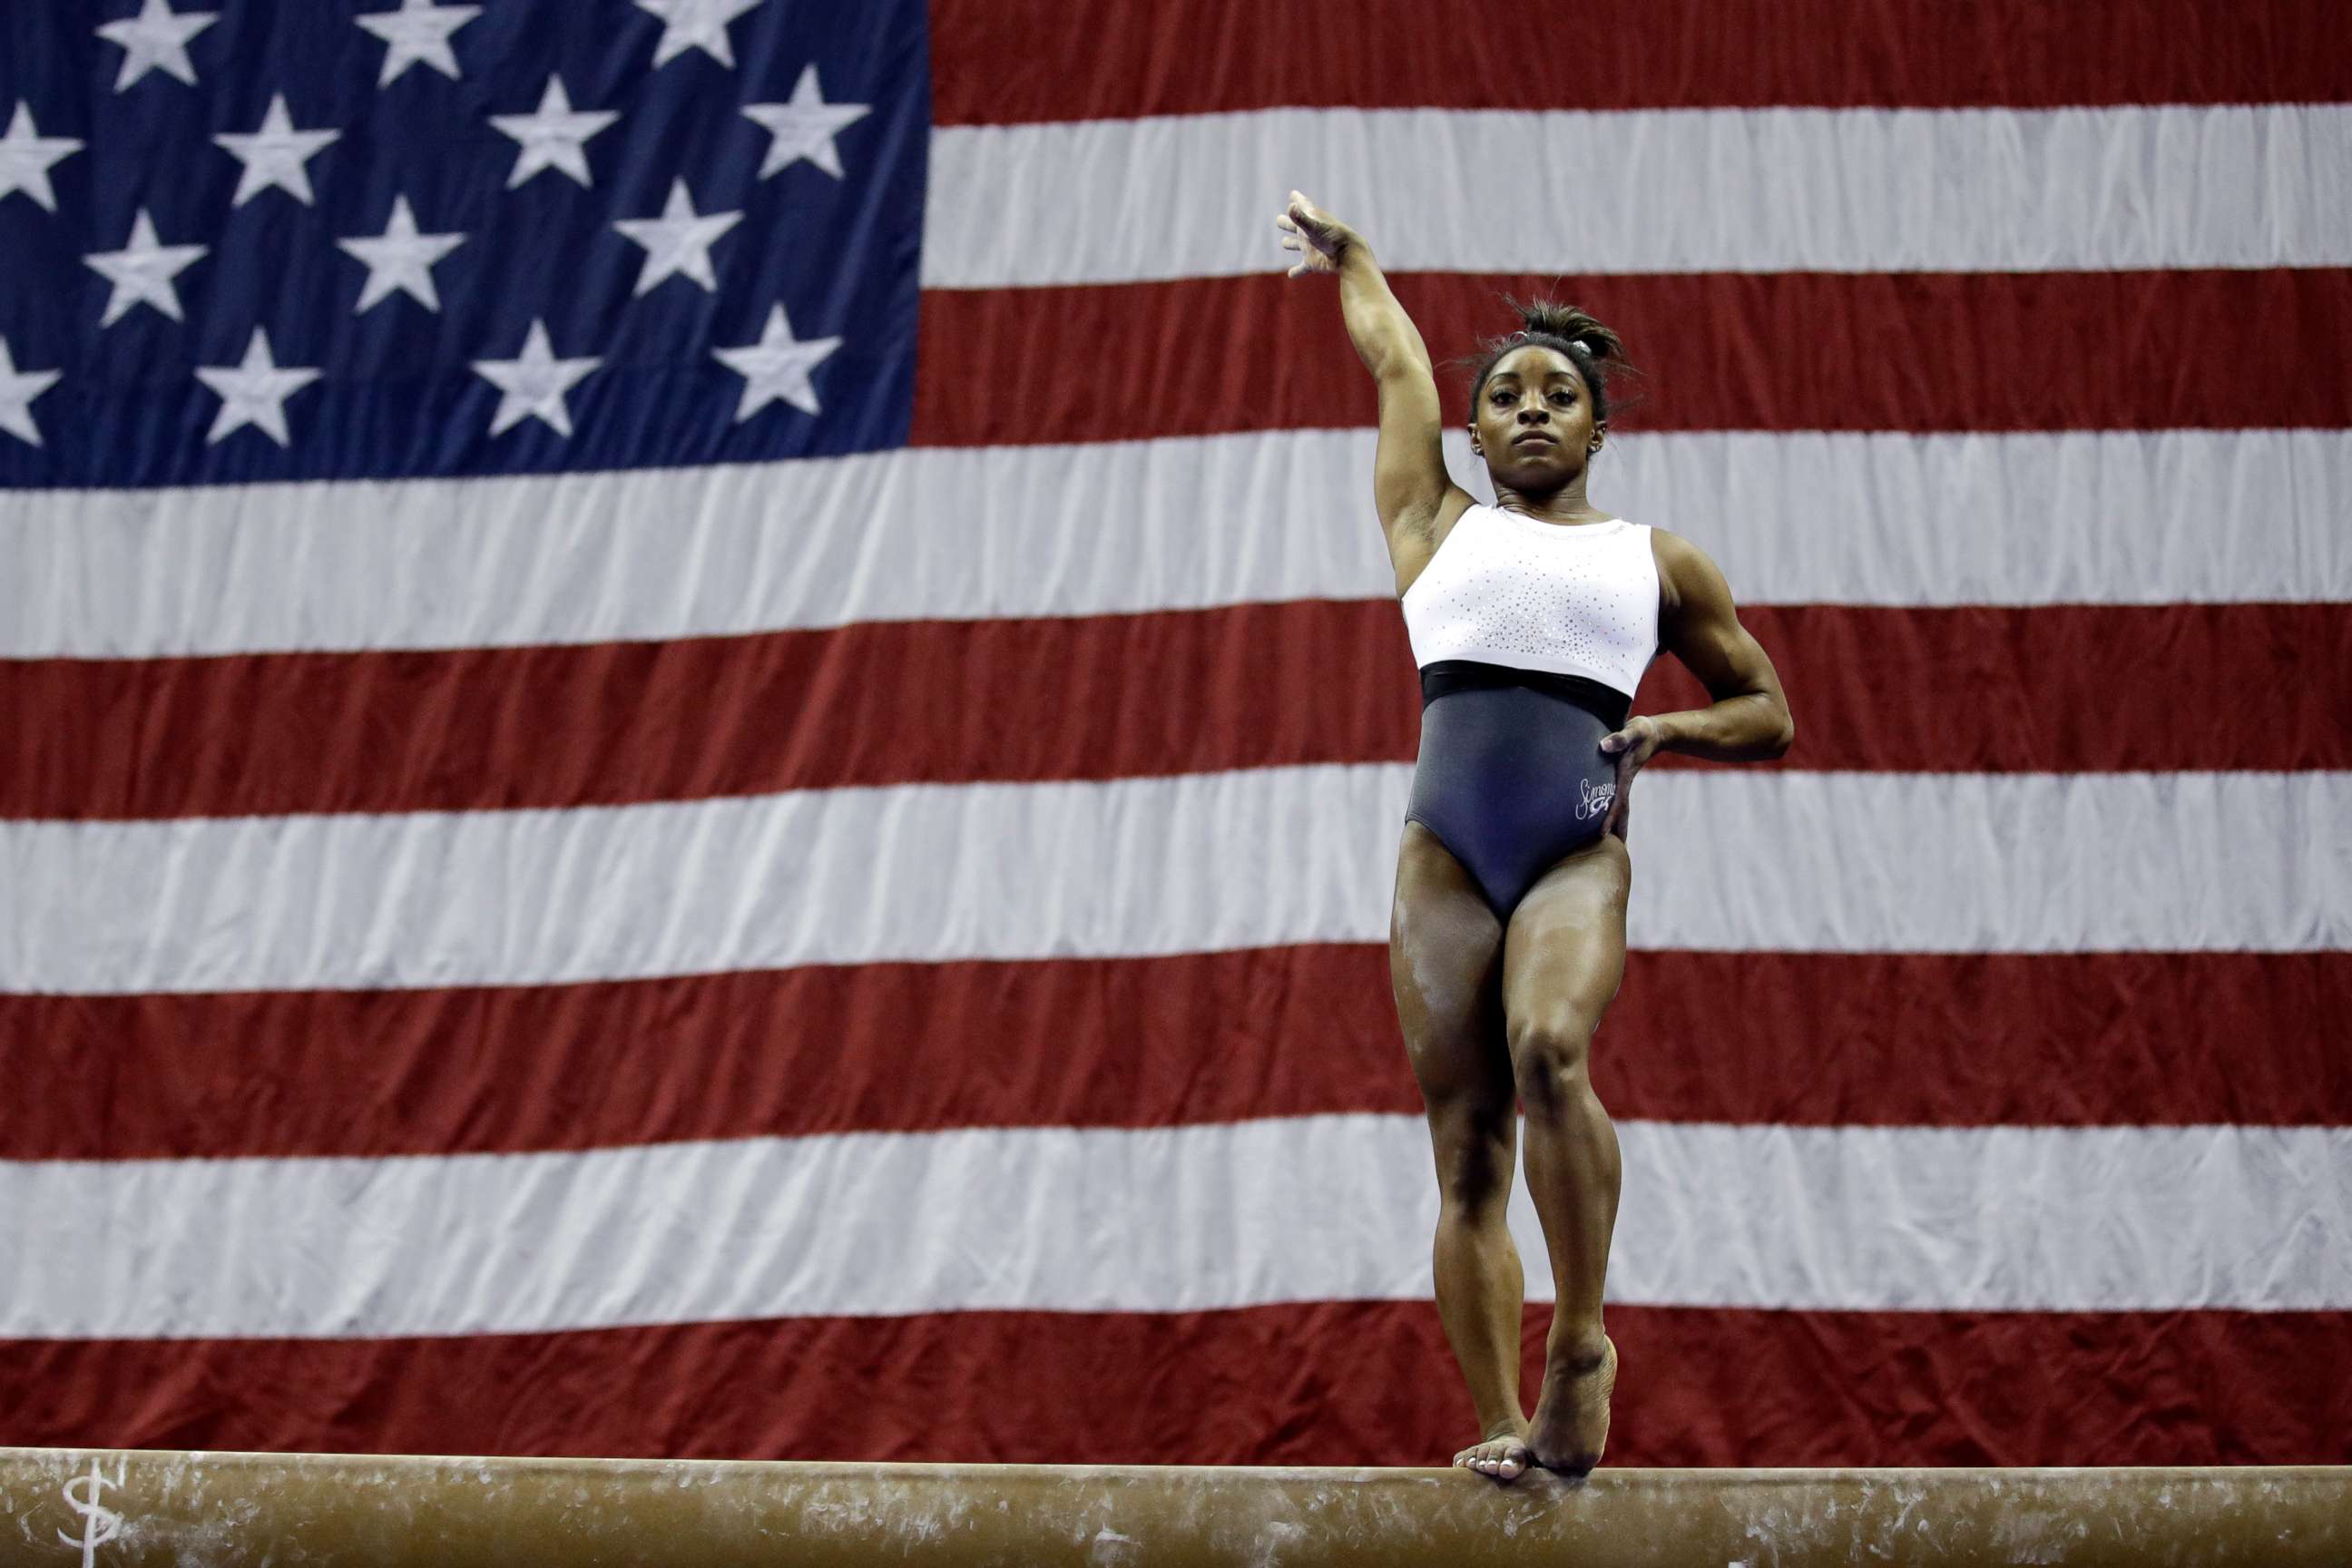 PHOTO: Simone Biles works on the beam during practice for the U.S. gymnastics championships Wednesday, Aug. 7, 2019, in Kansas City, Mo.